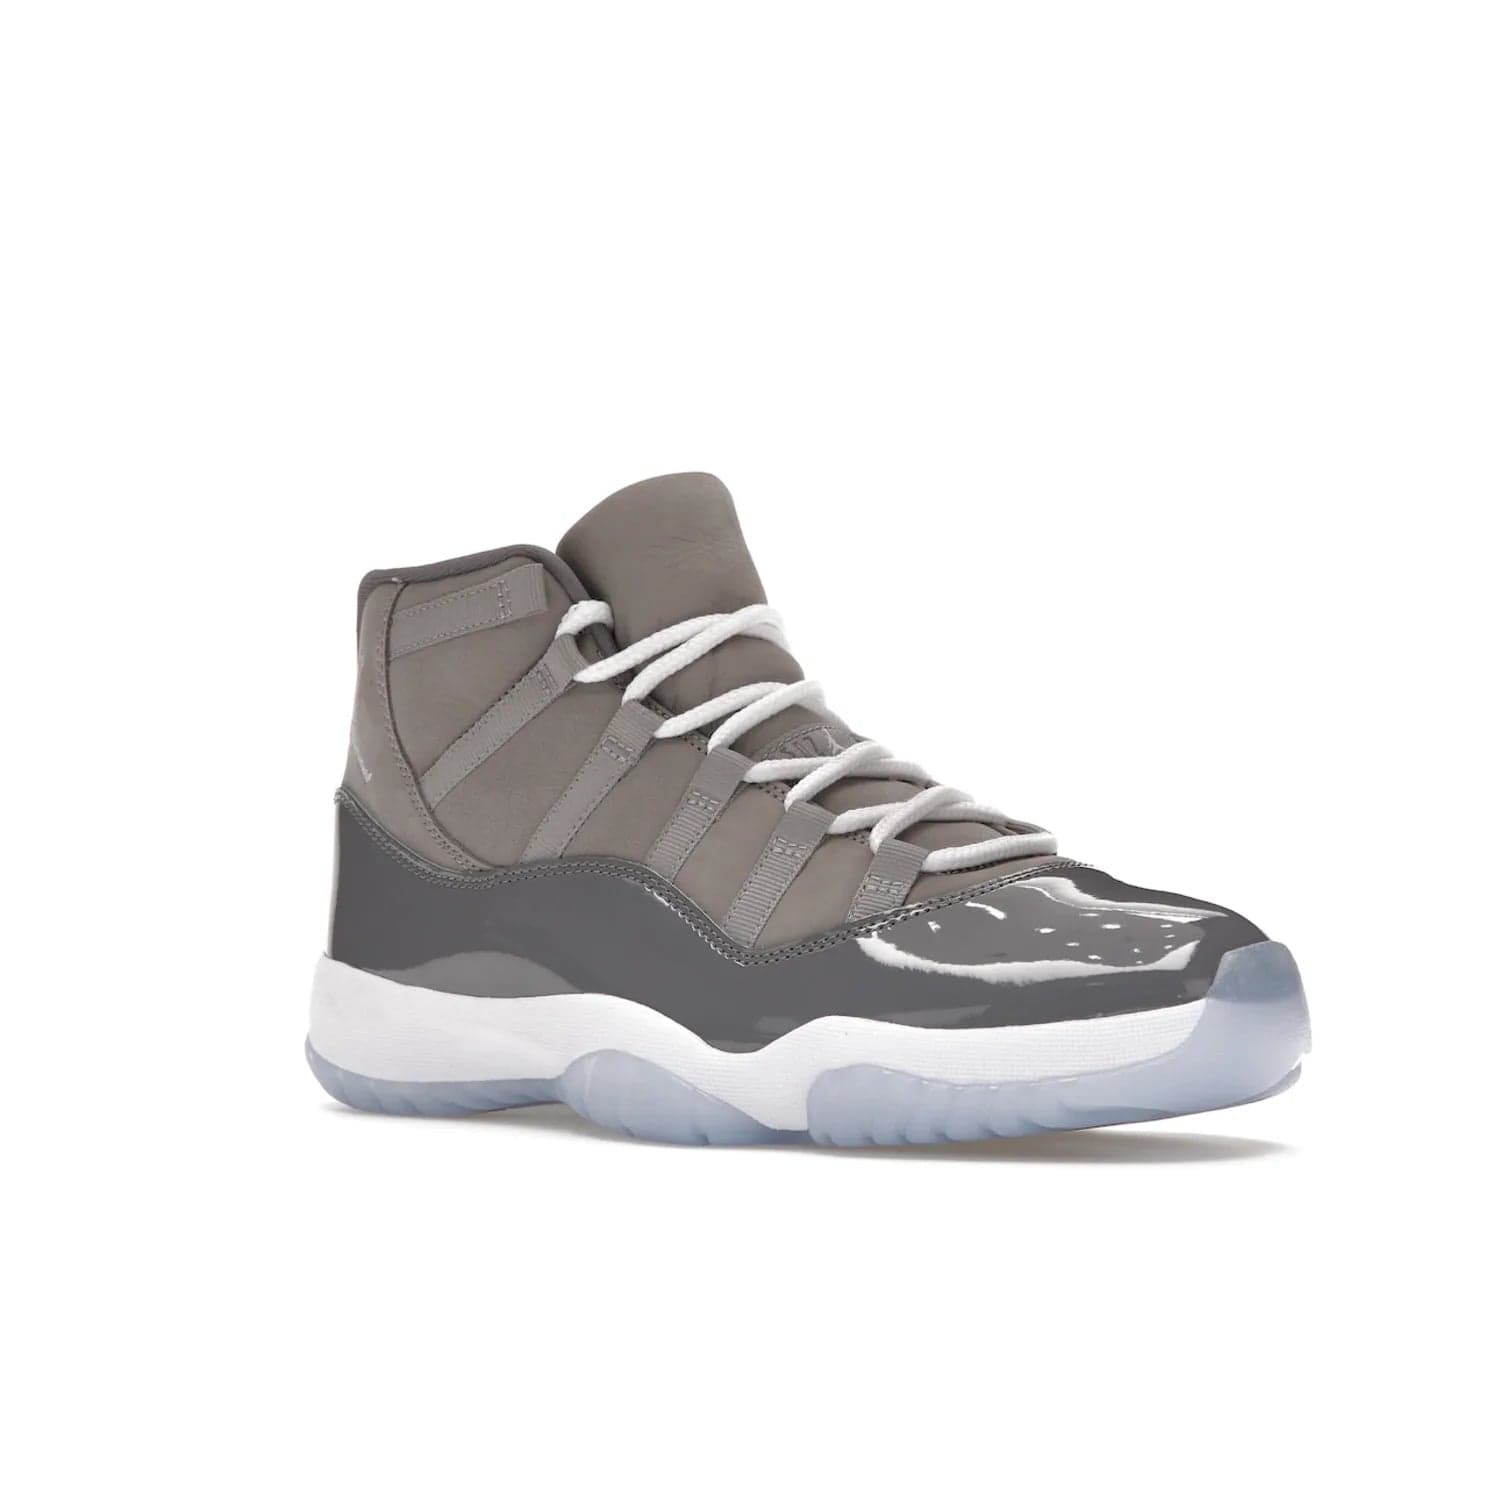 Jordan 11 Retro Cool Grey (2021) - Image 5 - Only at www.BallersClubKickz.com - Shop the Air Jordan 11 Retro Cool Grey (2021) for a must-have sneaker with a Cool Grey Durabuck upper, patent leather overlays, signature Jumpman embroidery, a white midsole, icy blue translucent outsole, and Multi-Color accents.  Released in December 2021 for $225.